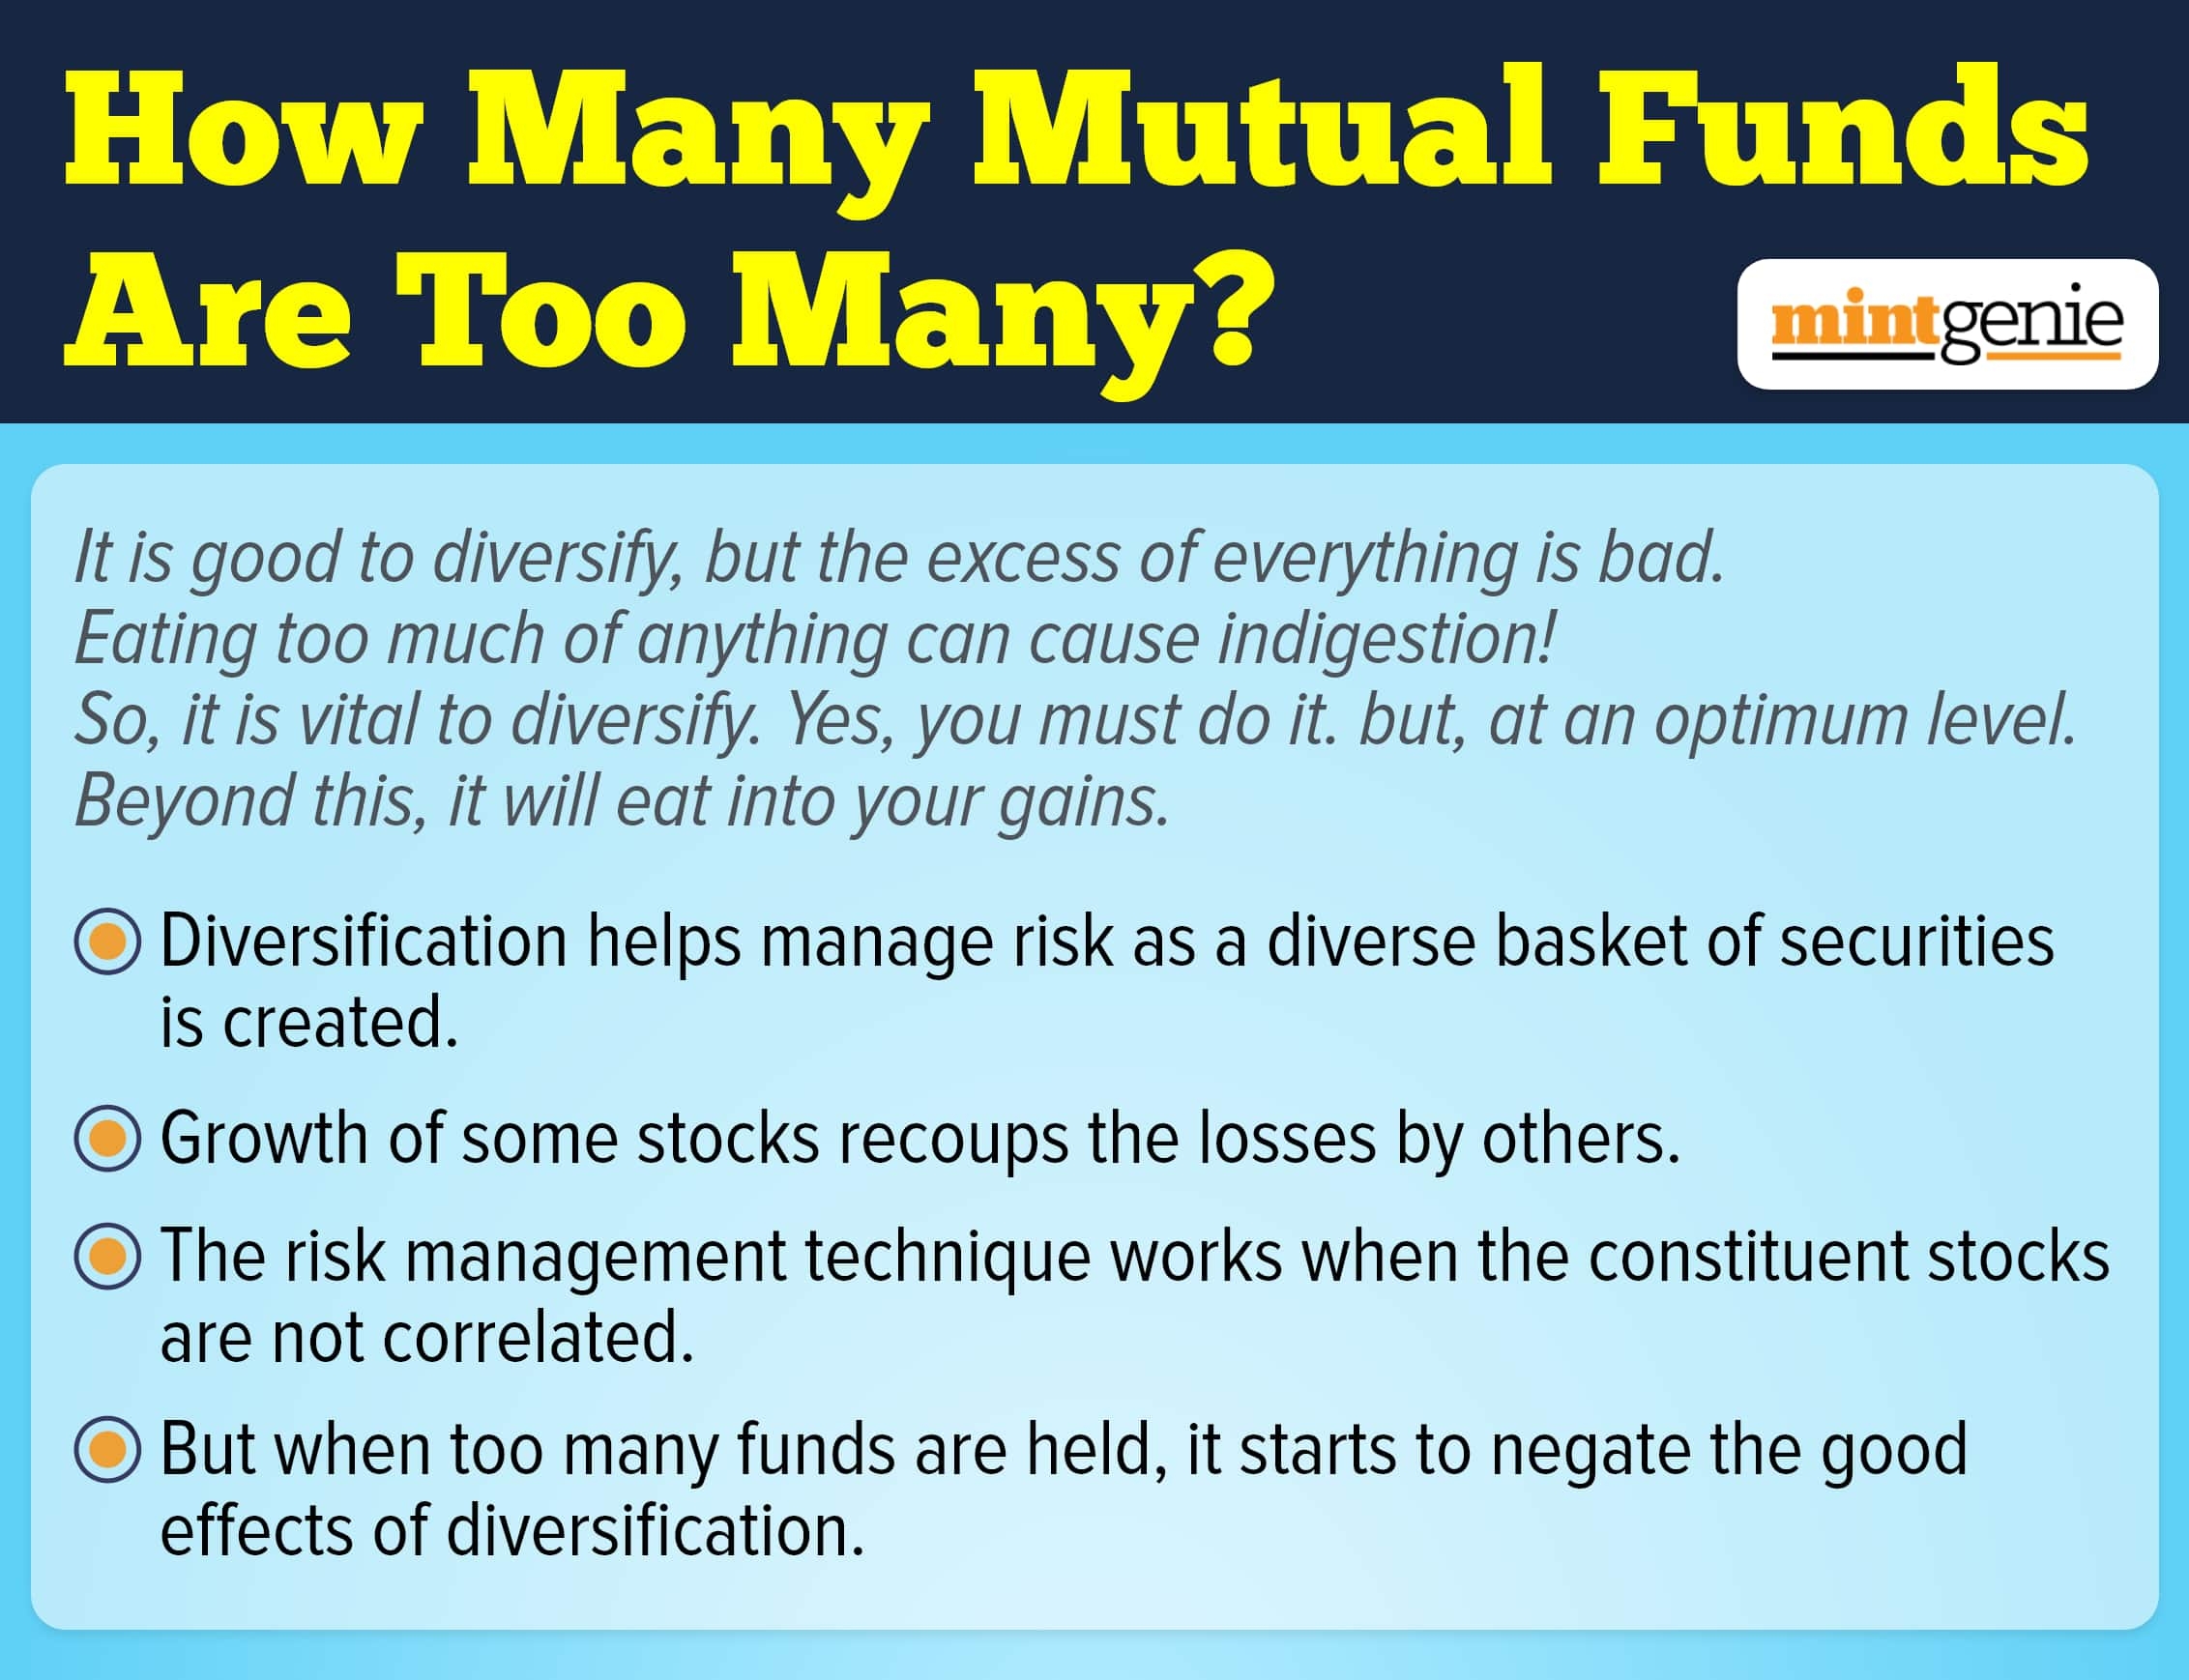 We explain how many mutual funds are too many.